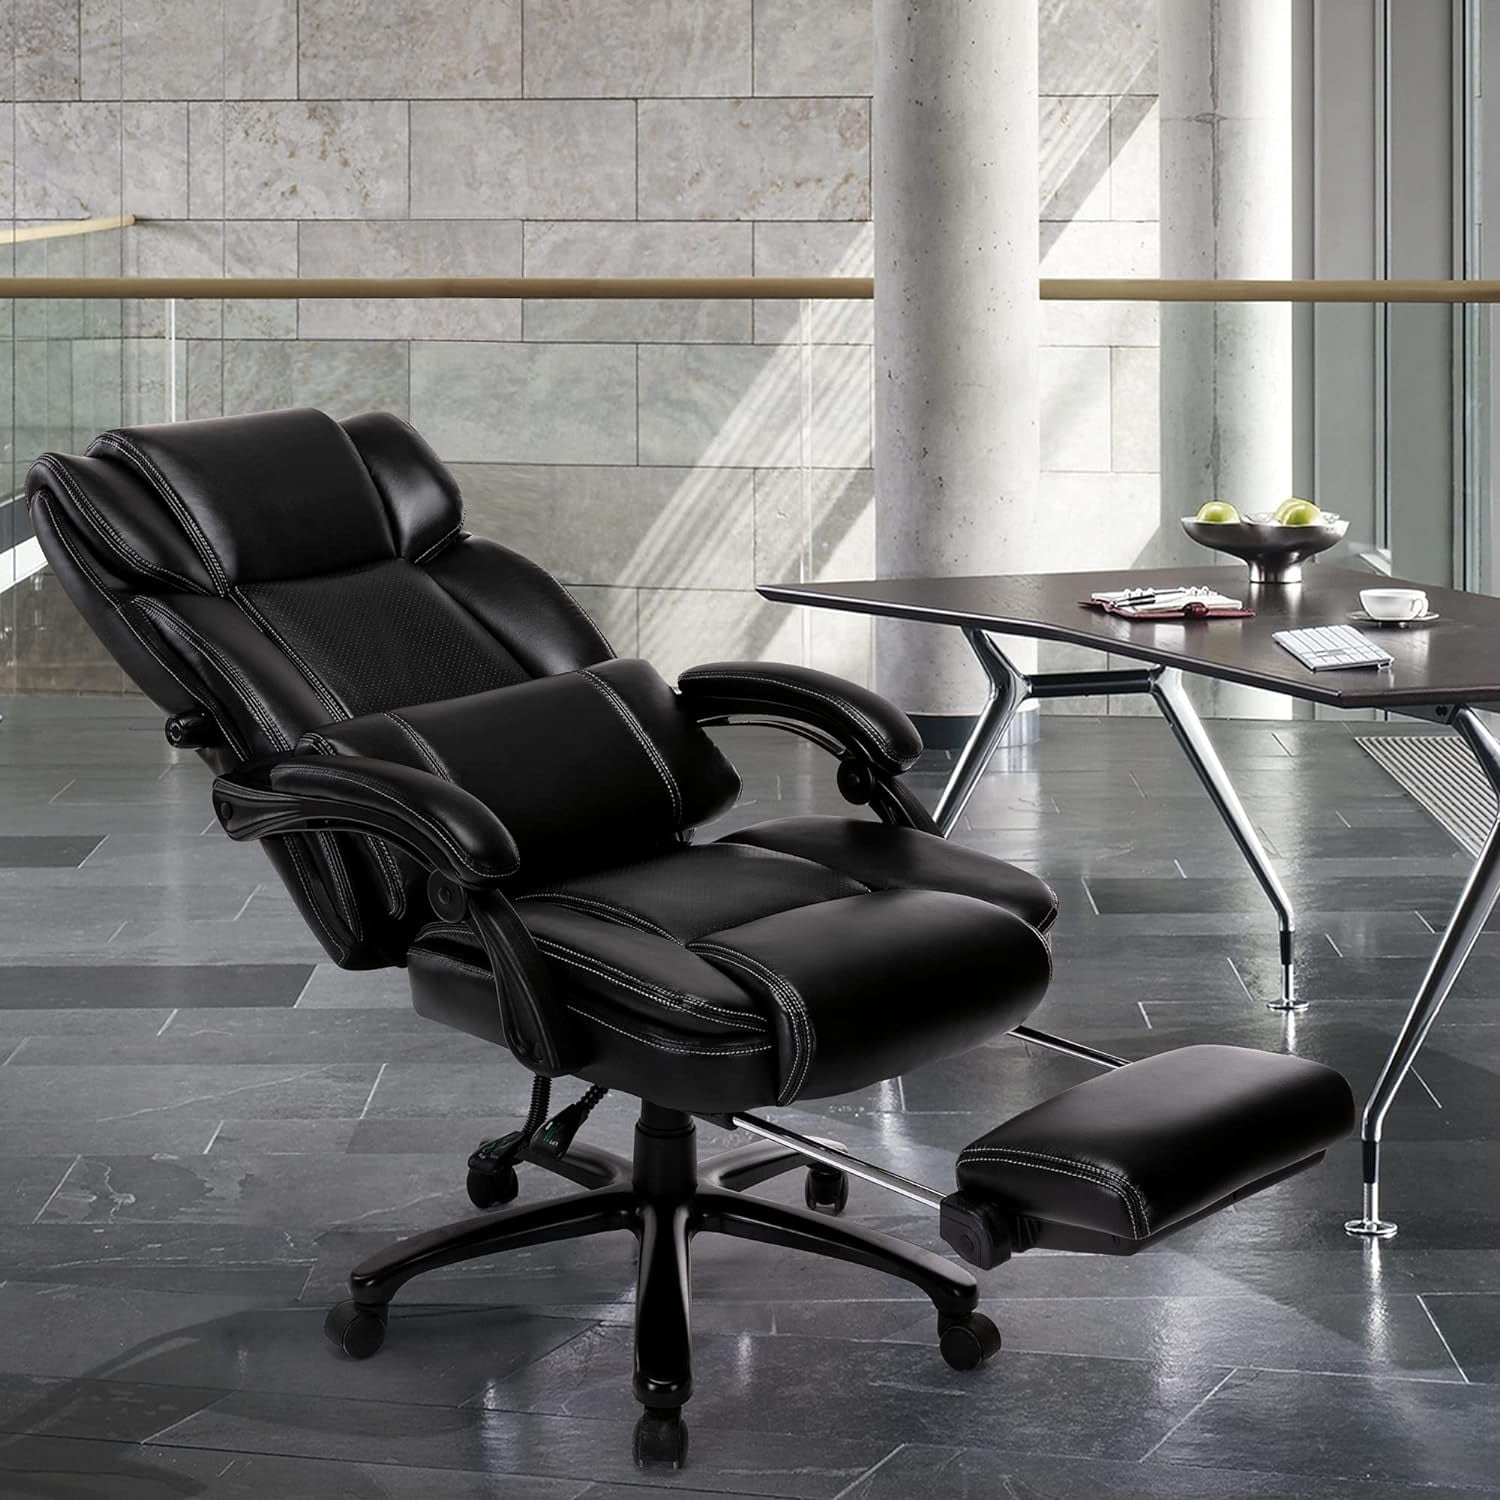 https://ak1.ostkcdn.com/images/products/is/images/direct/1c022743f31330a8f0943b82cb69c905be21d1a0/Big-and-Tall-Ergonomic-Executive-Computer-Desk-Office-Chair-with-Footrest.jpg